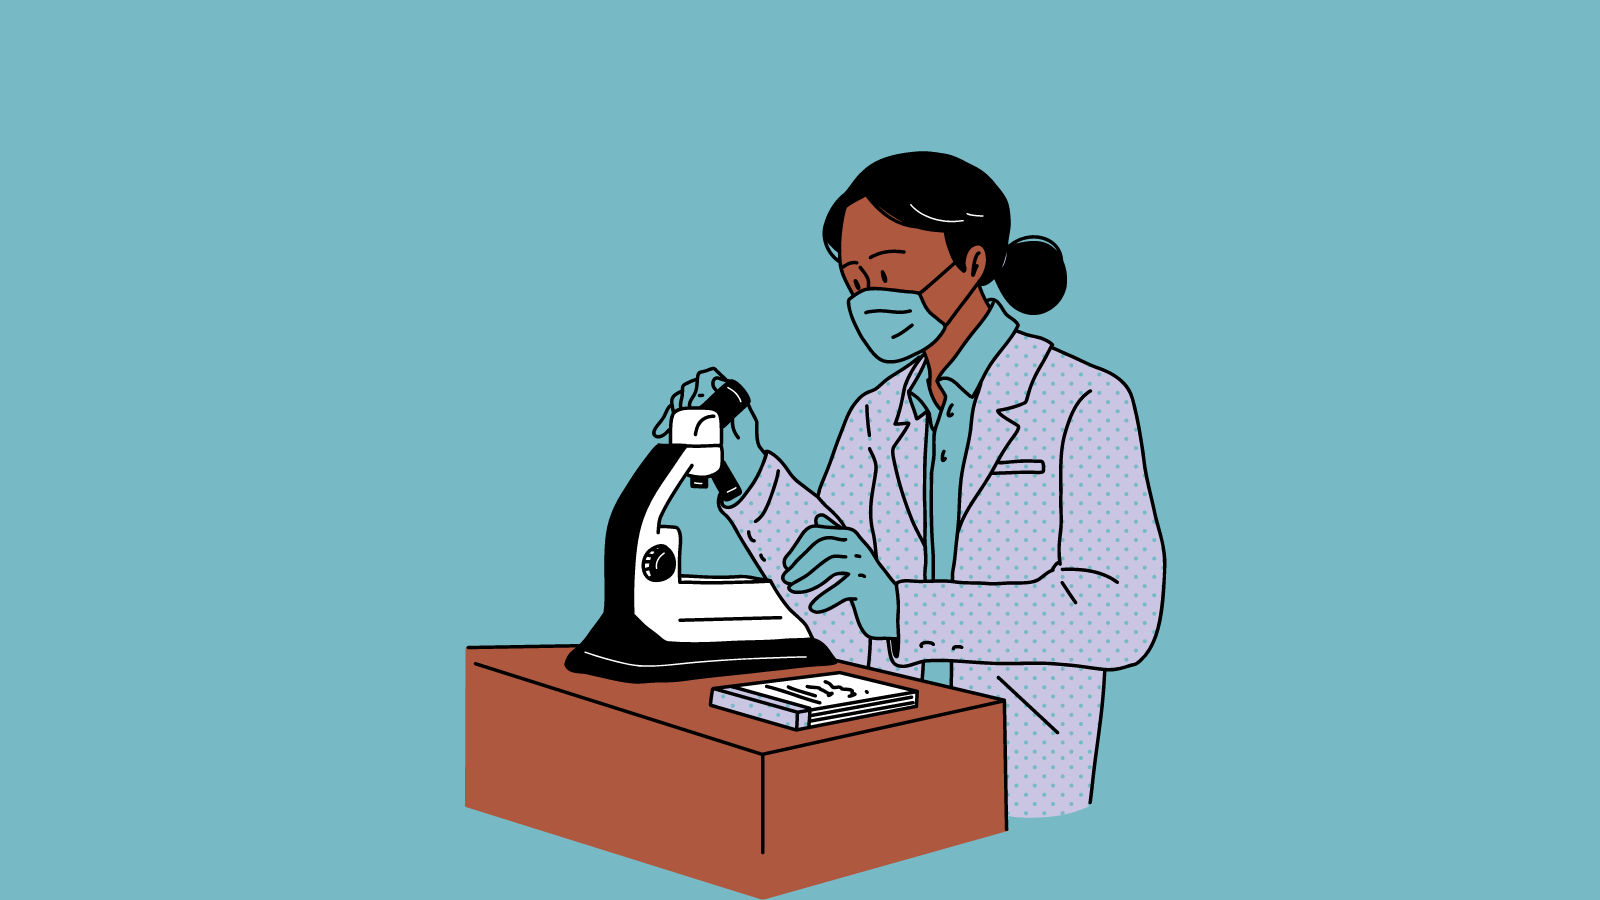 A scientist in a lab coat using a microscope